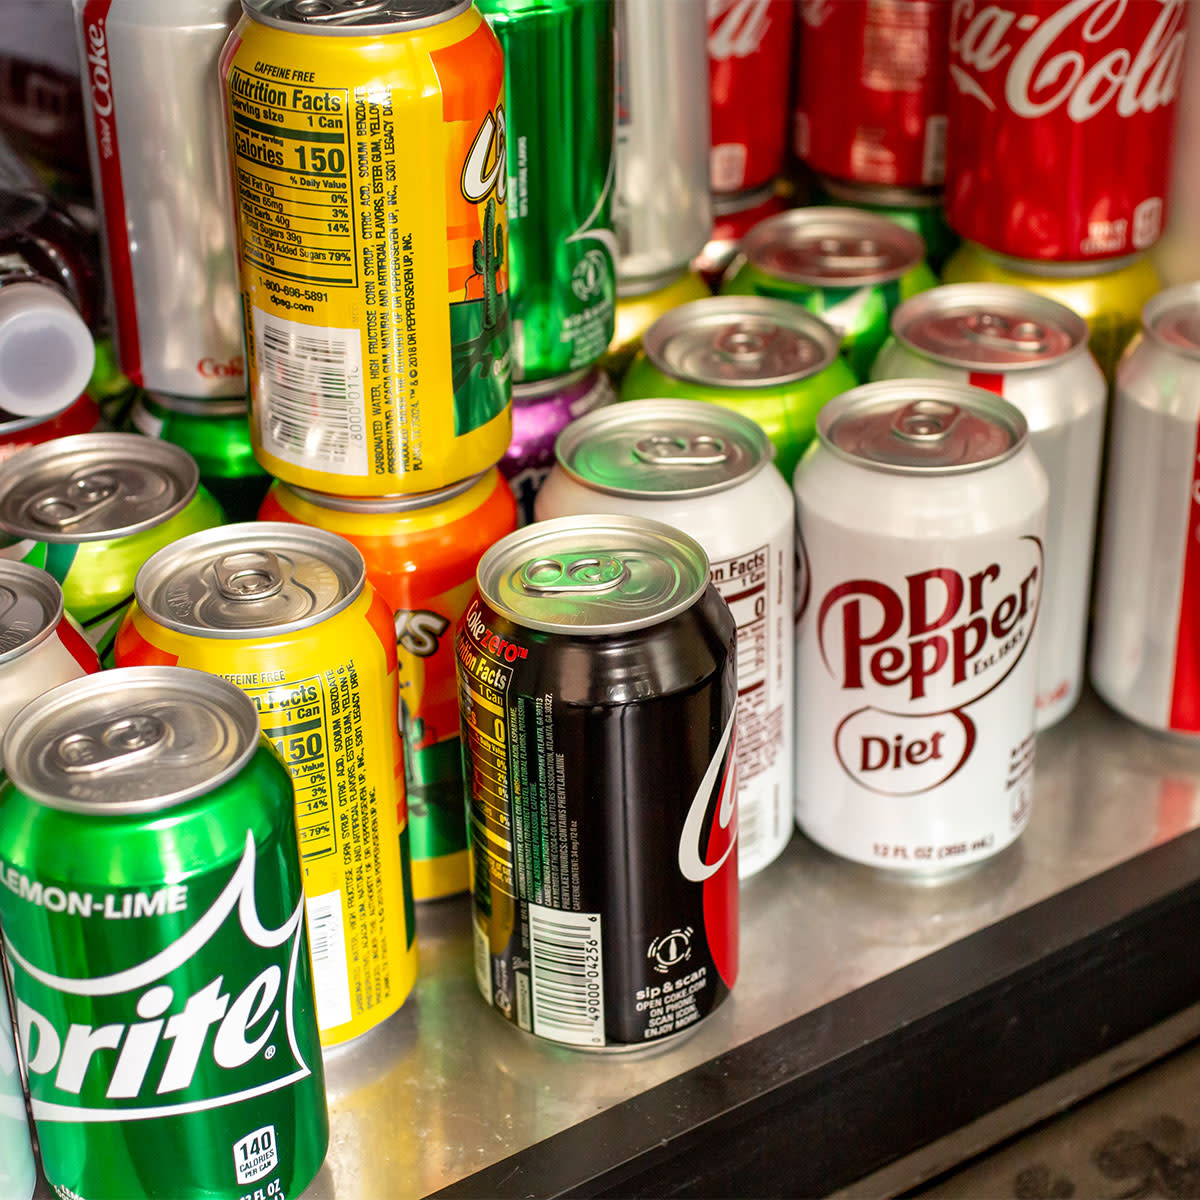 cans of sprite, diet doctor pepper, and other sodas in fridge